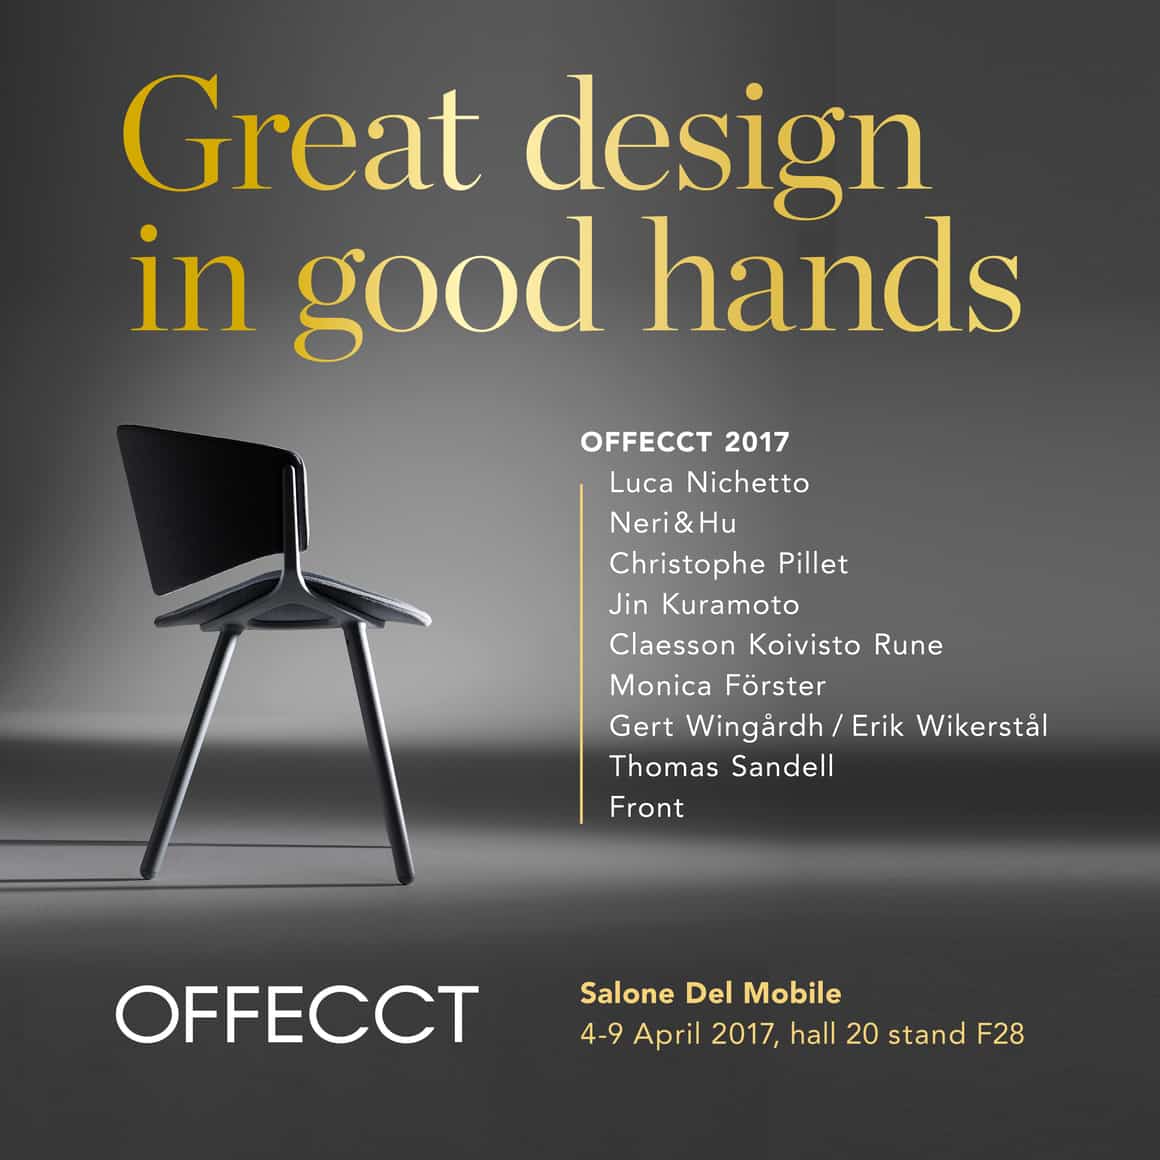 Offecct in Milano